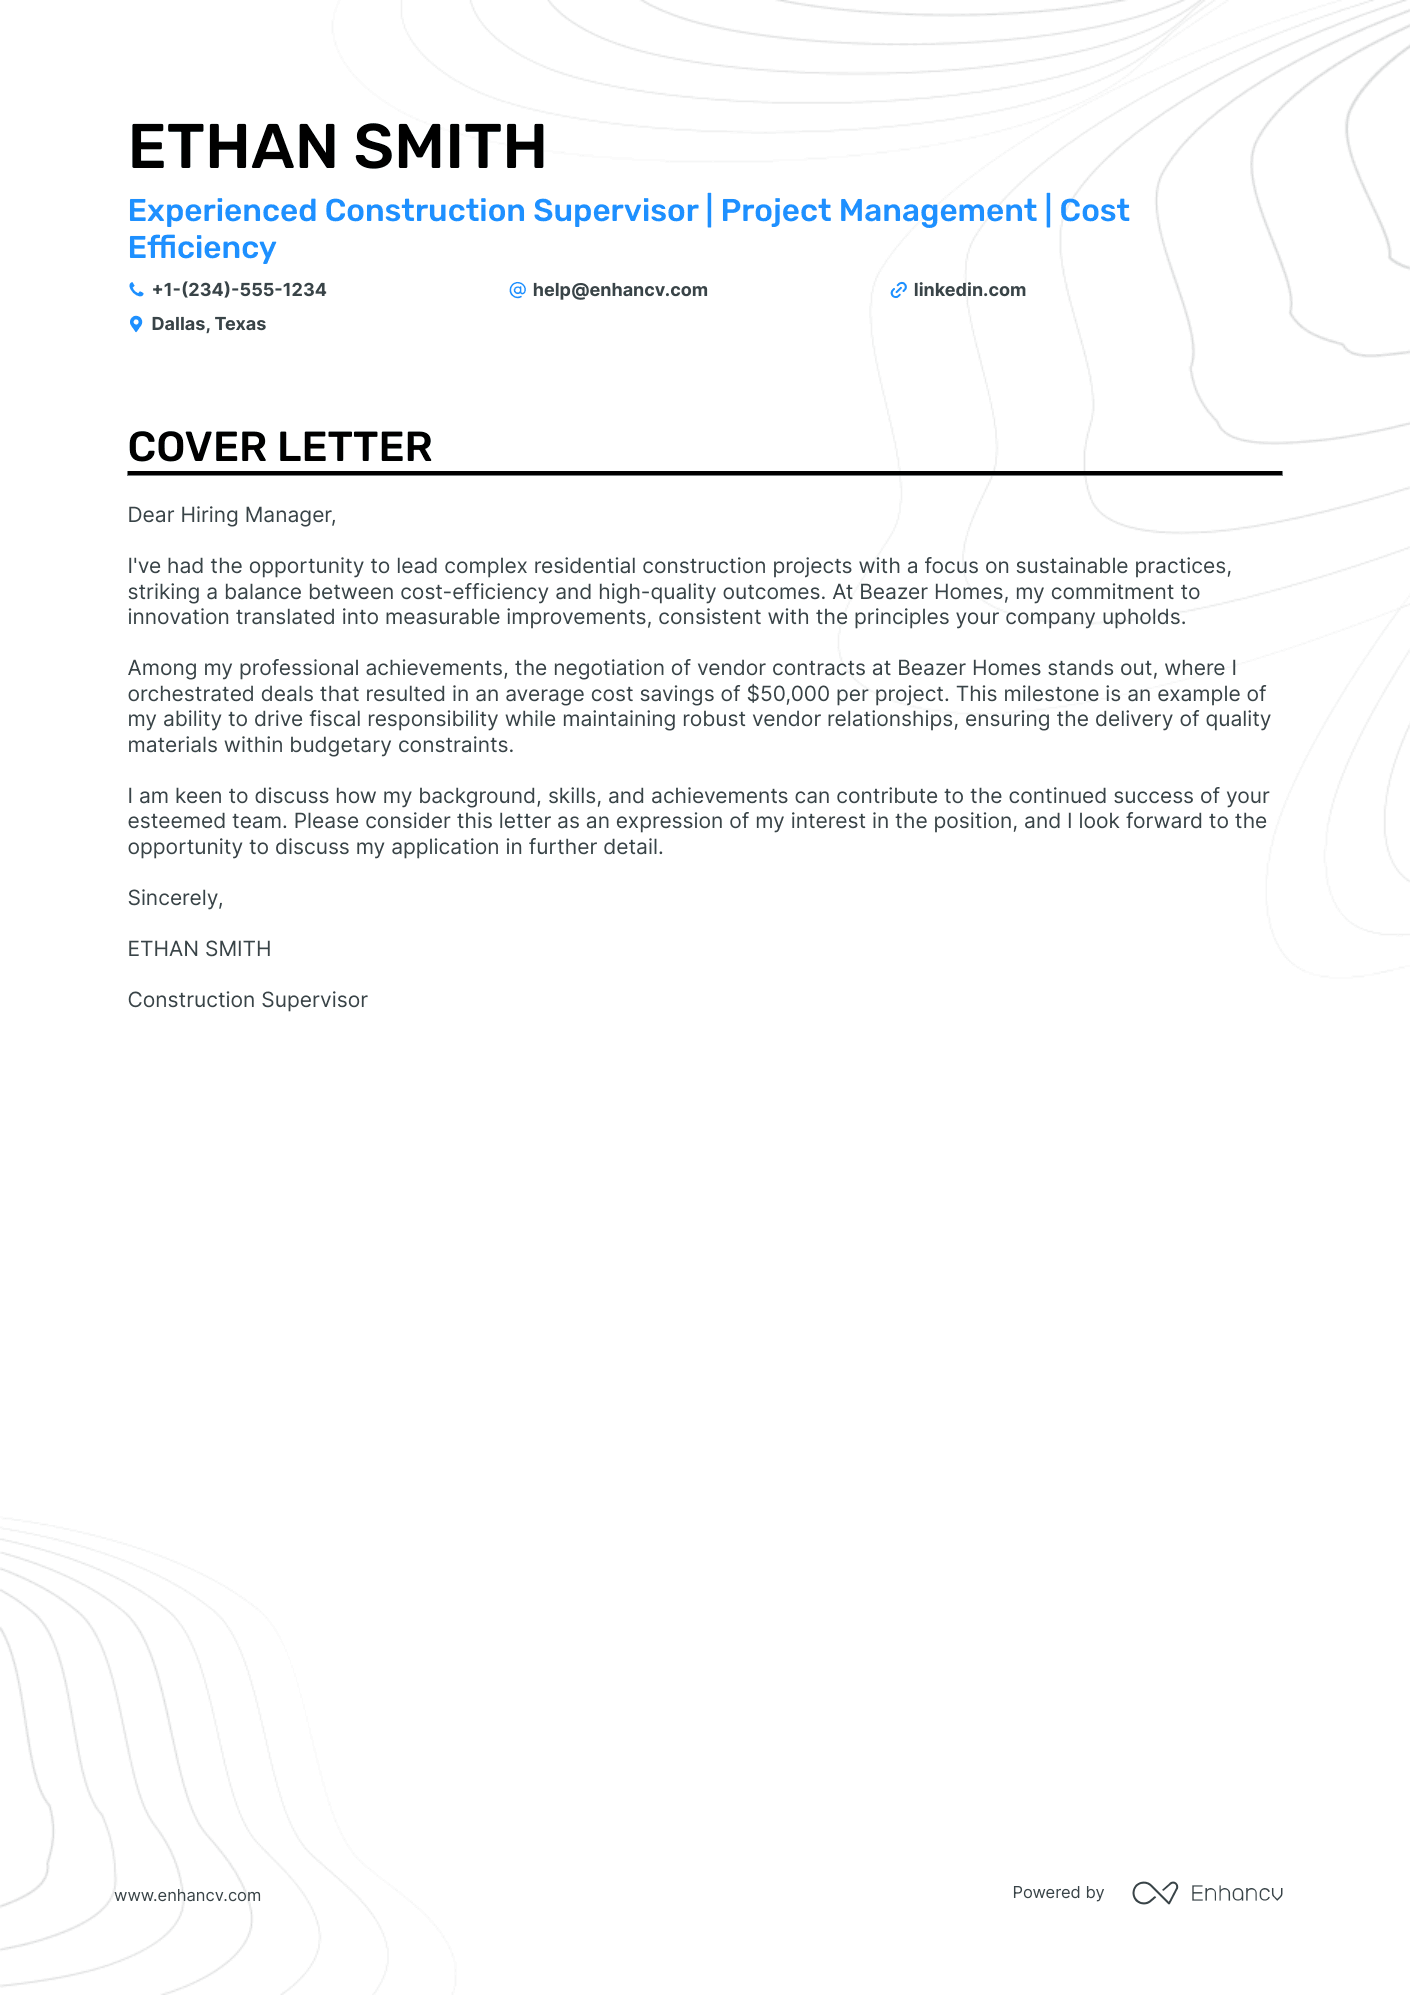 Construction Manager cover letter